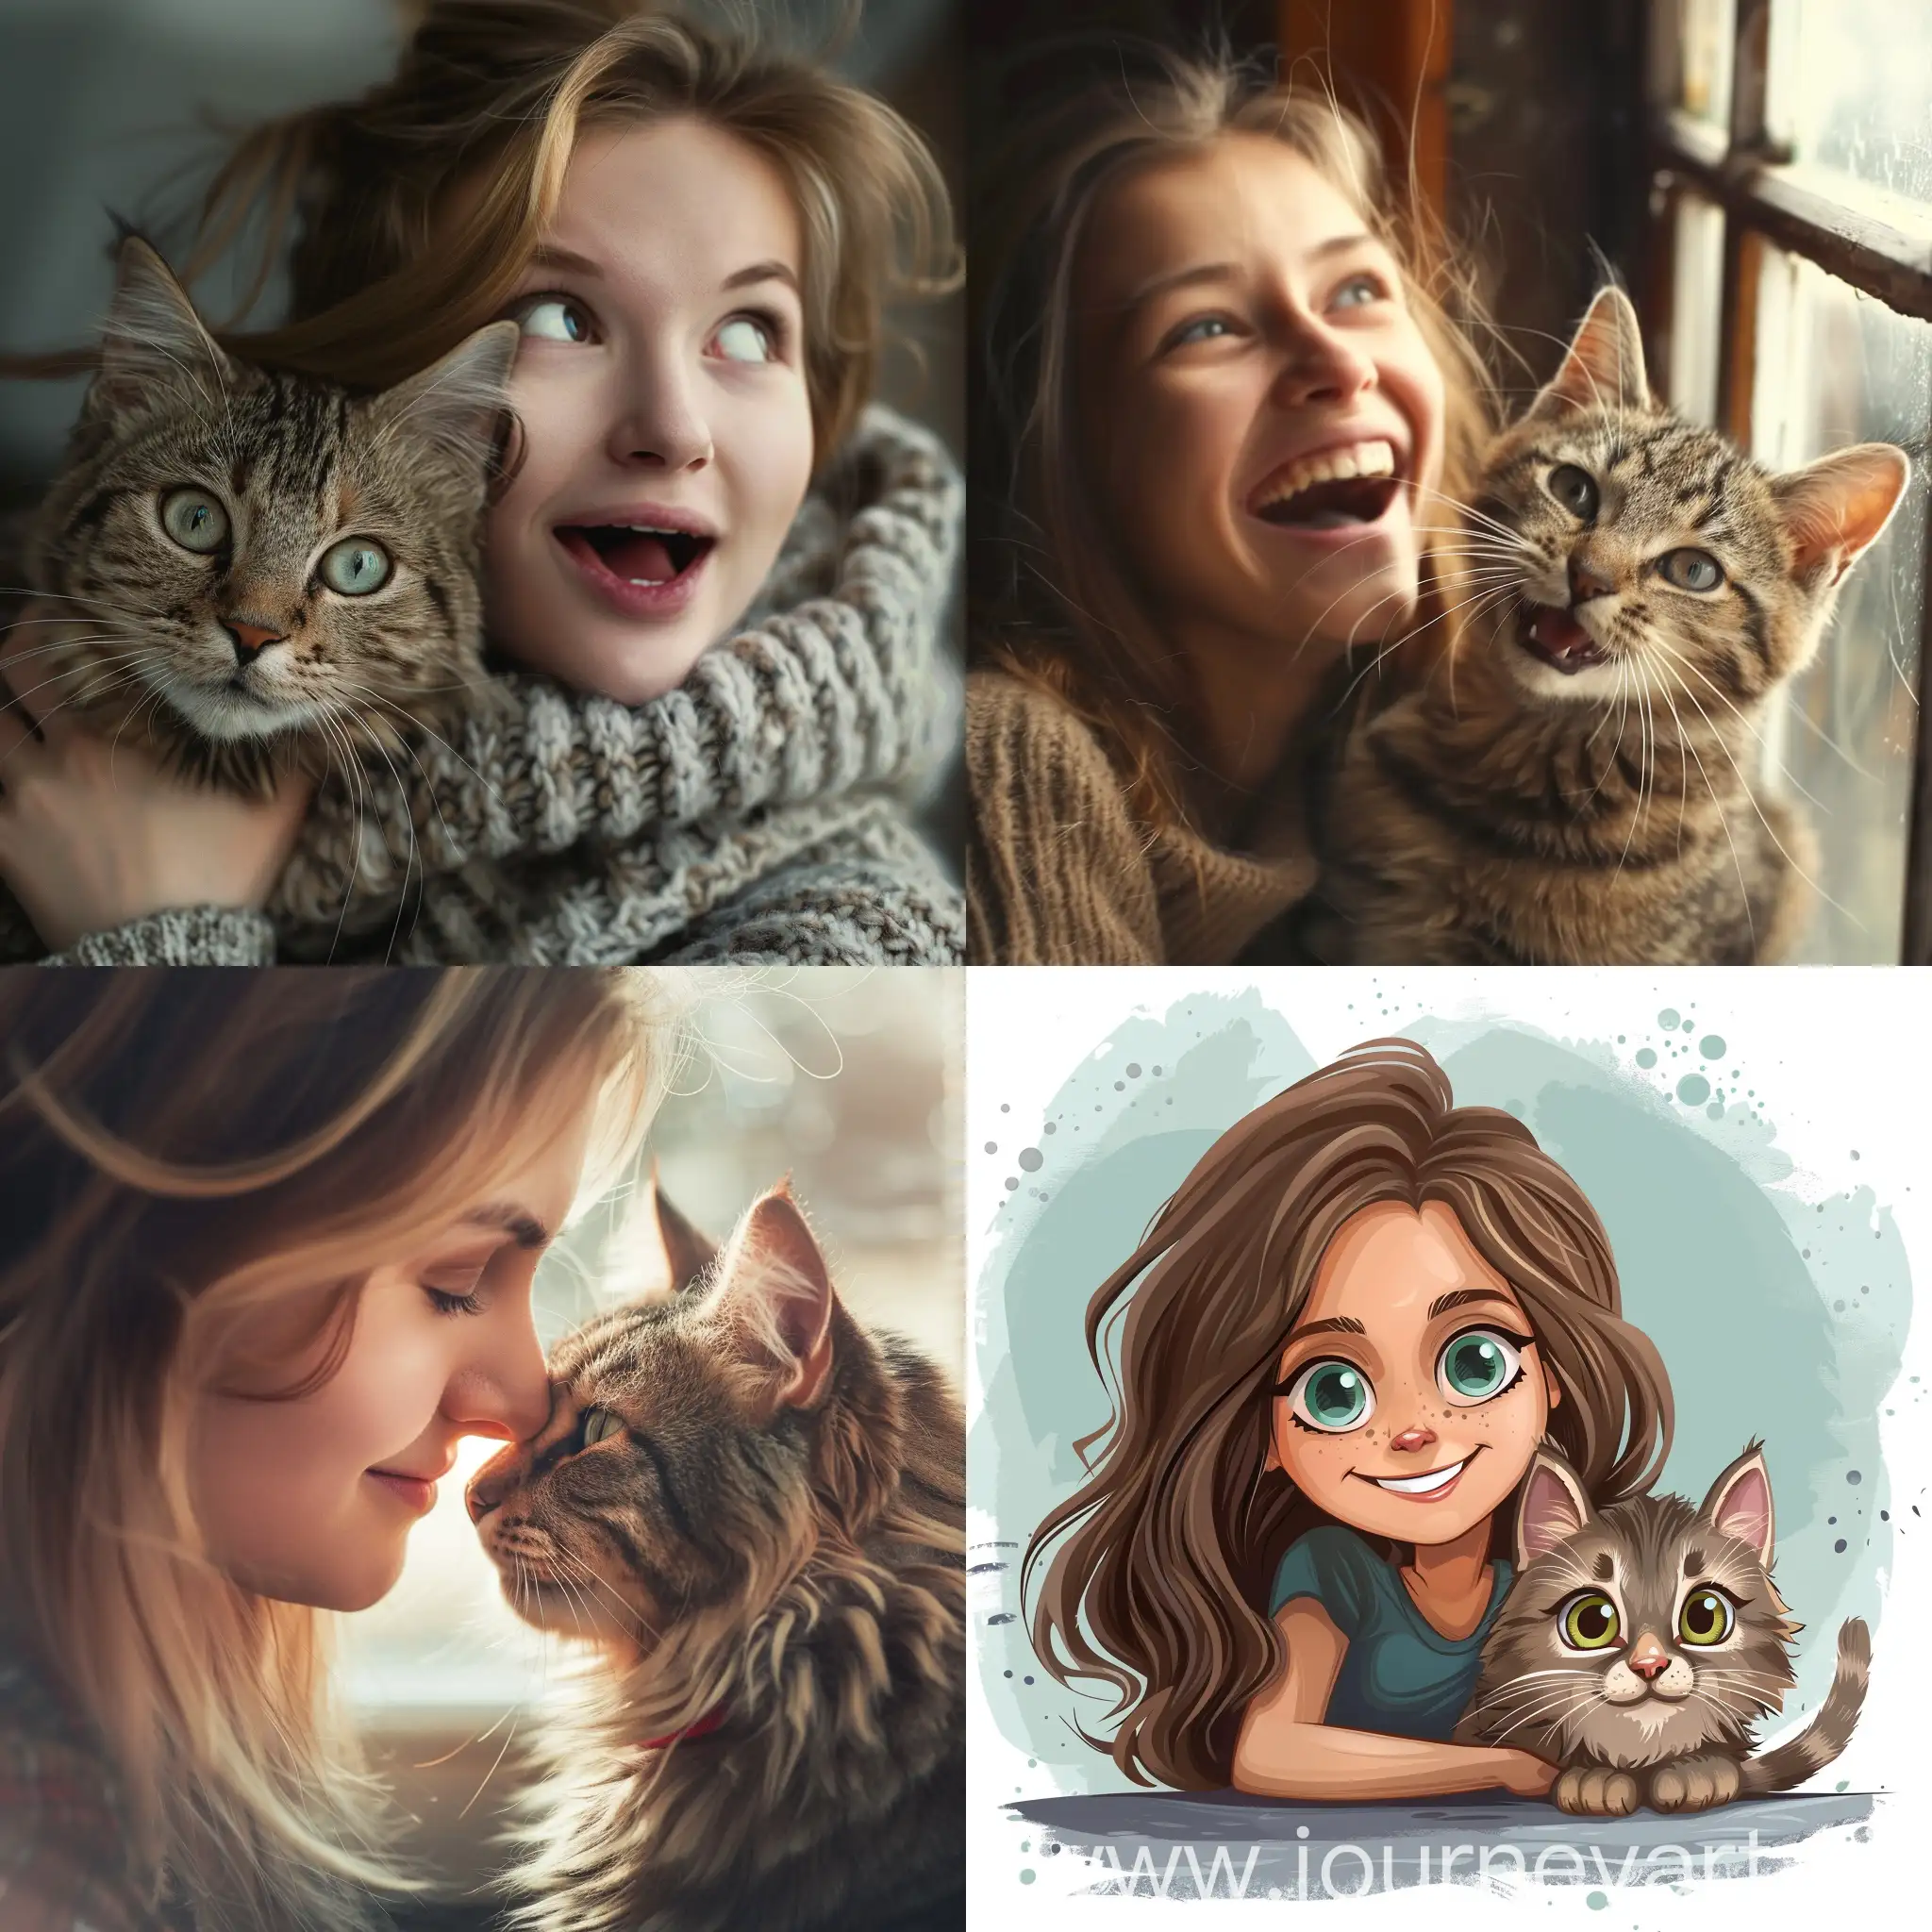 Cheerful-Girl-Playing-with-Playful-Cat